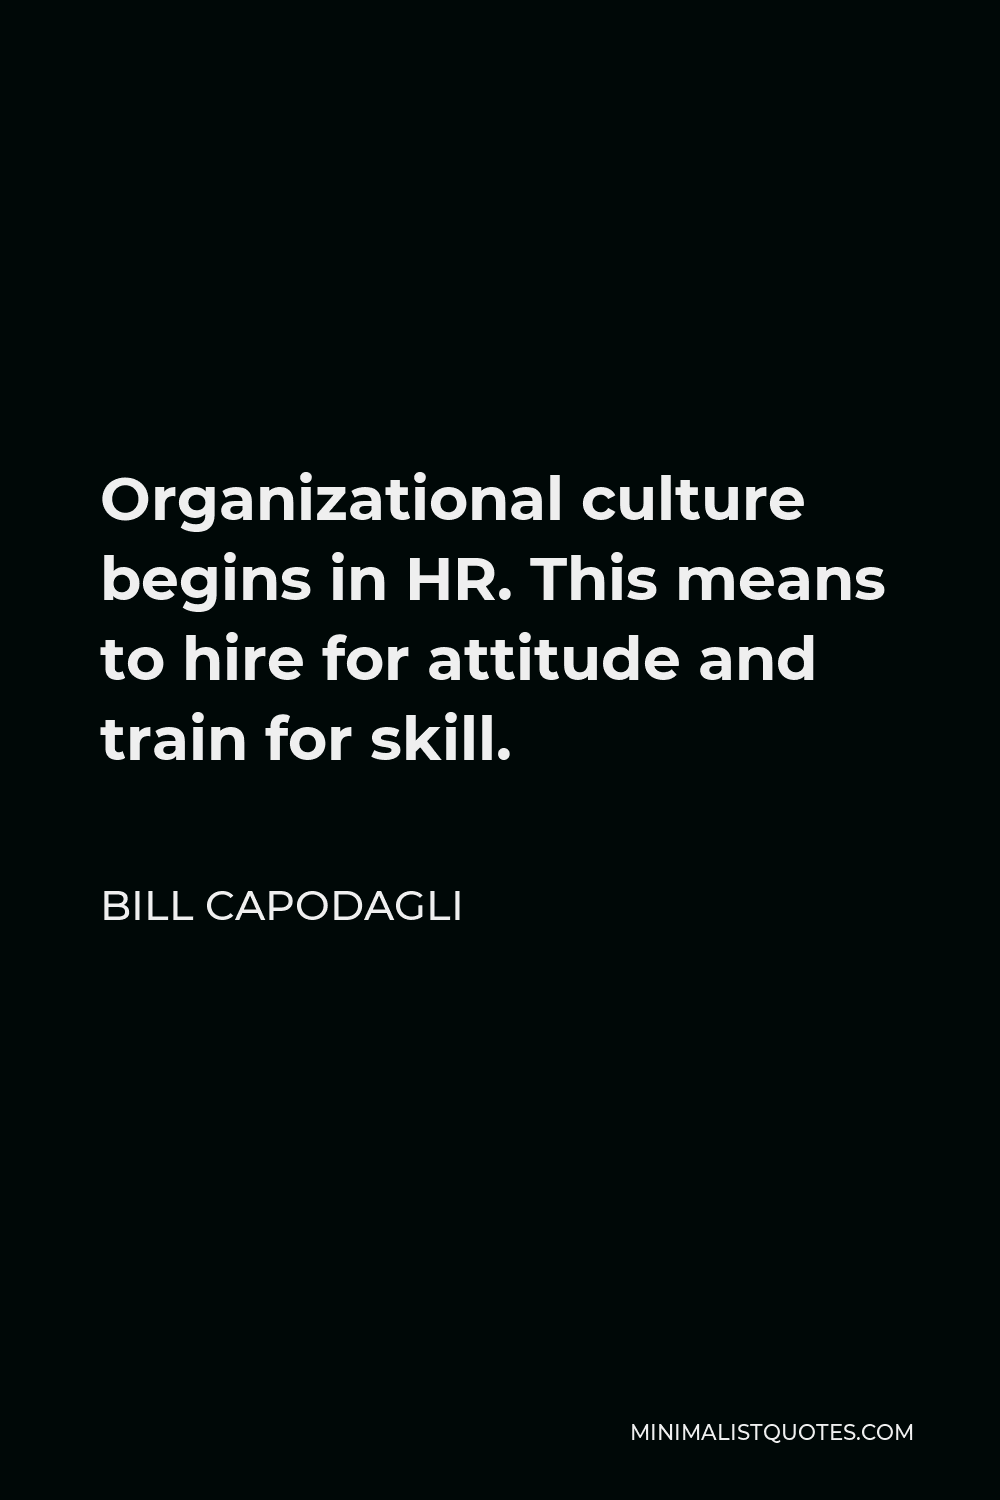 Bill Capodagli Quote - Organizational culture begins in HR. This means to hire for attitude and train for skill.